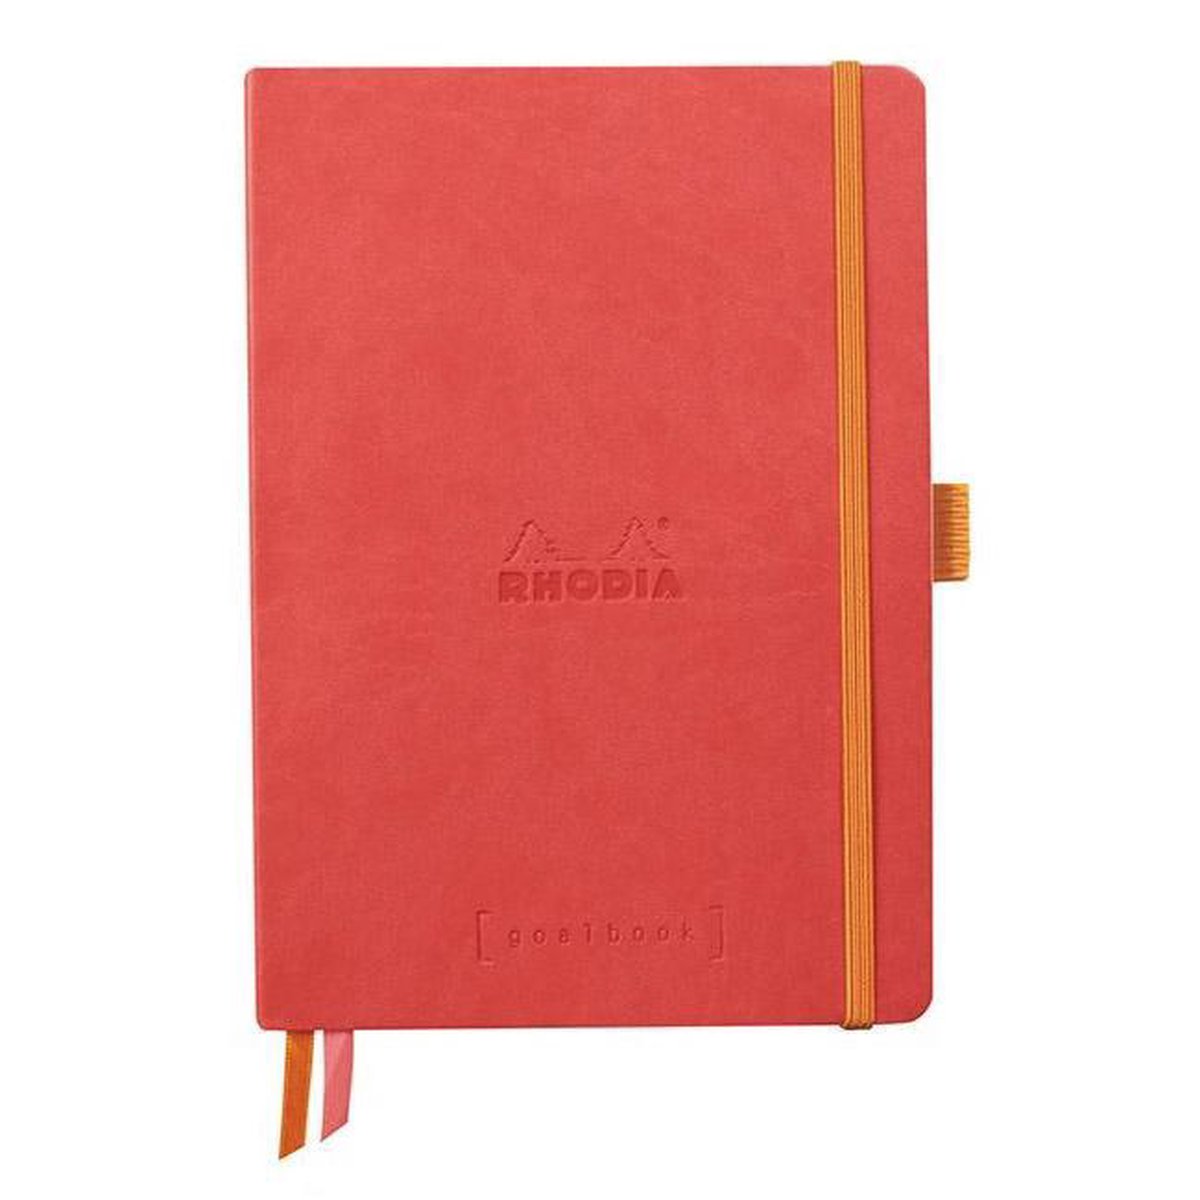 Rhodia Goalbook Dotted A5 Softcover - Coral